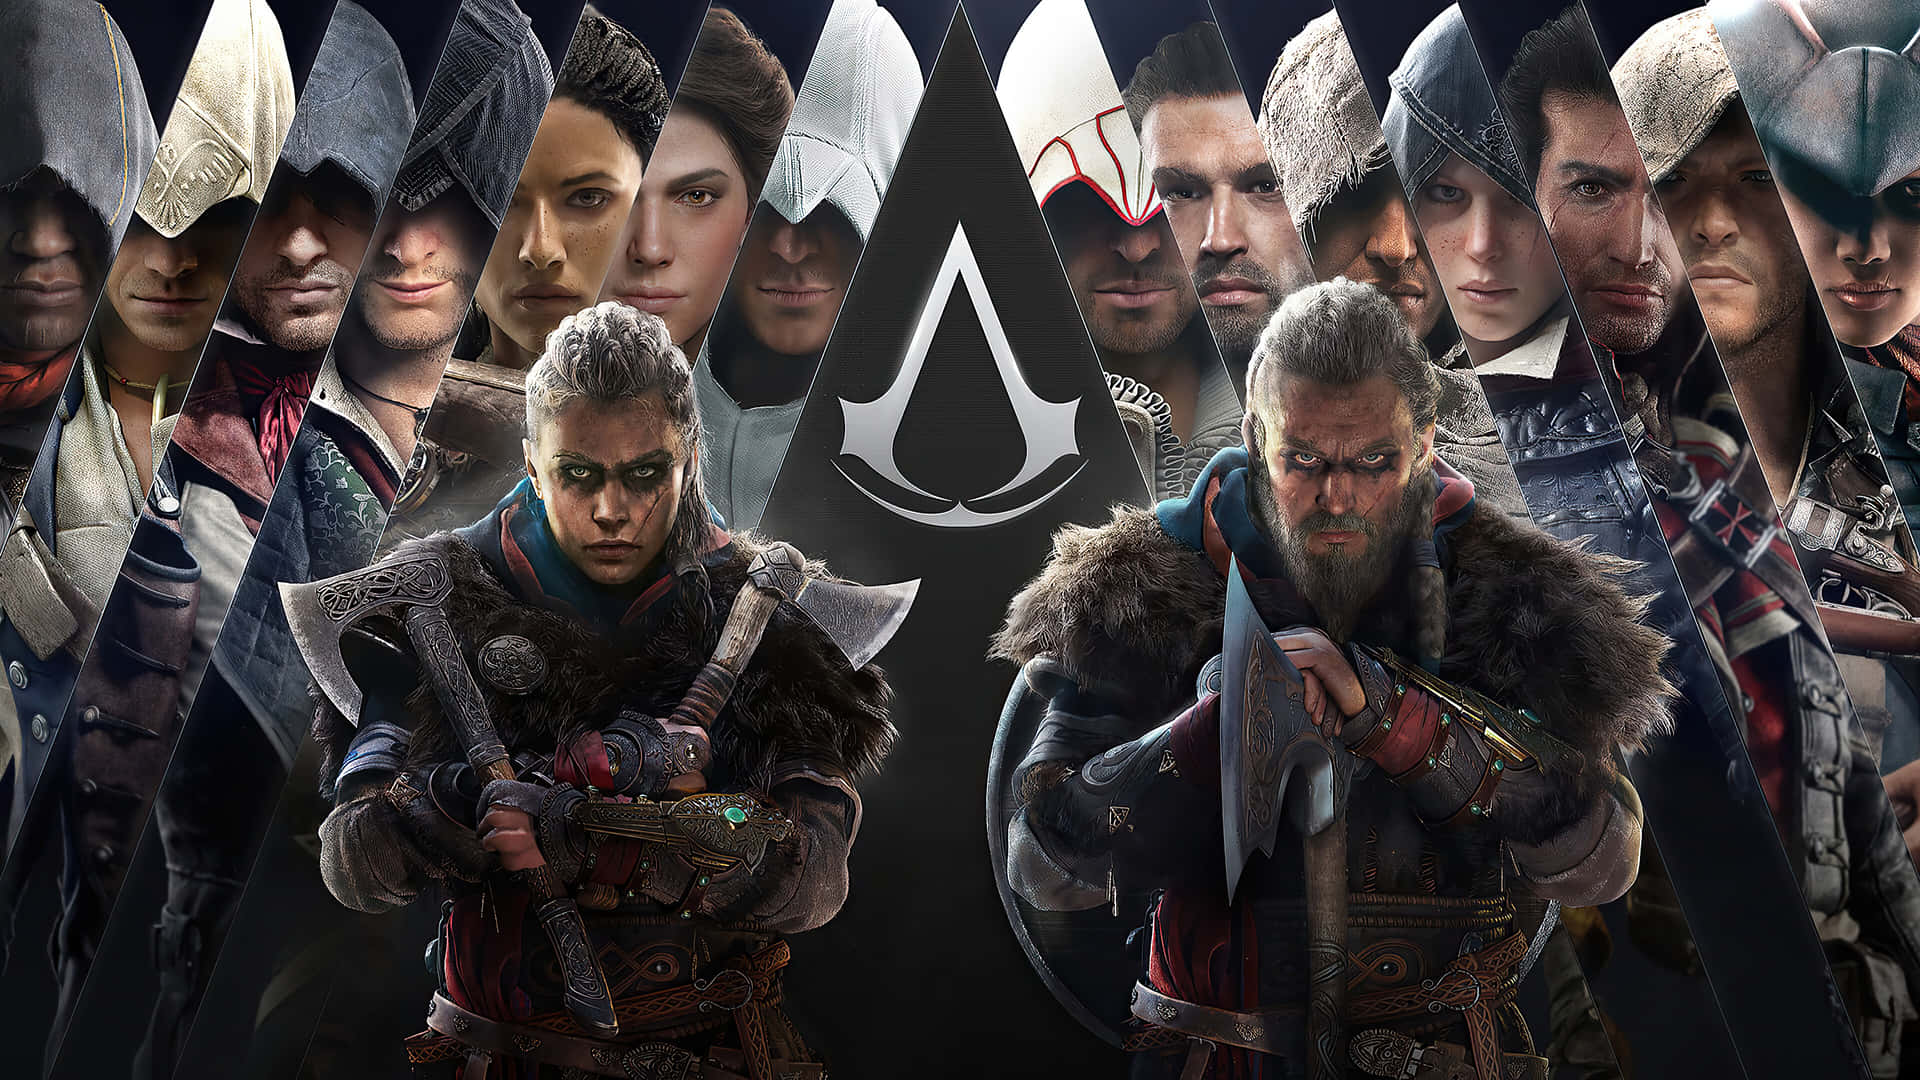 Iconic Assassin's Creed characters united in one epic depiction. Wallpaper